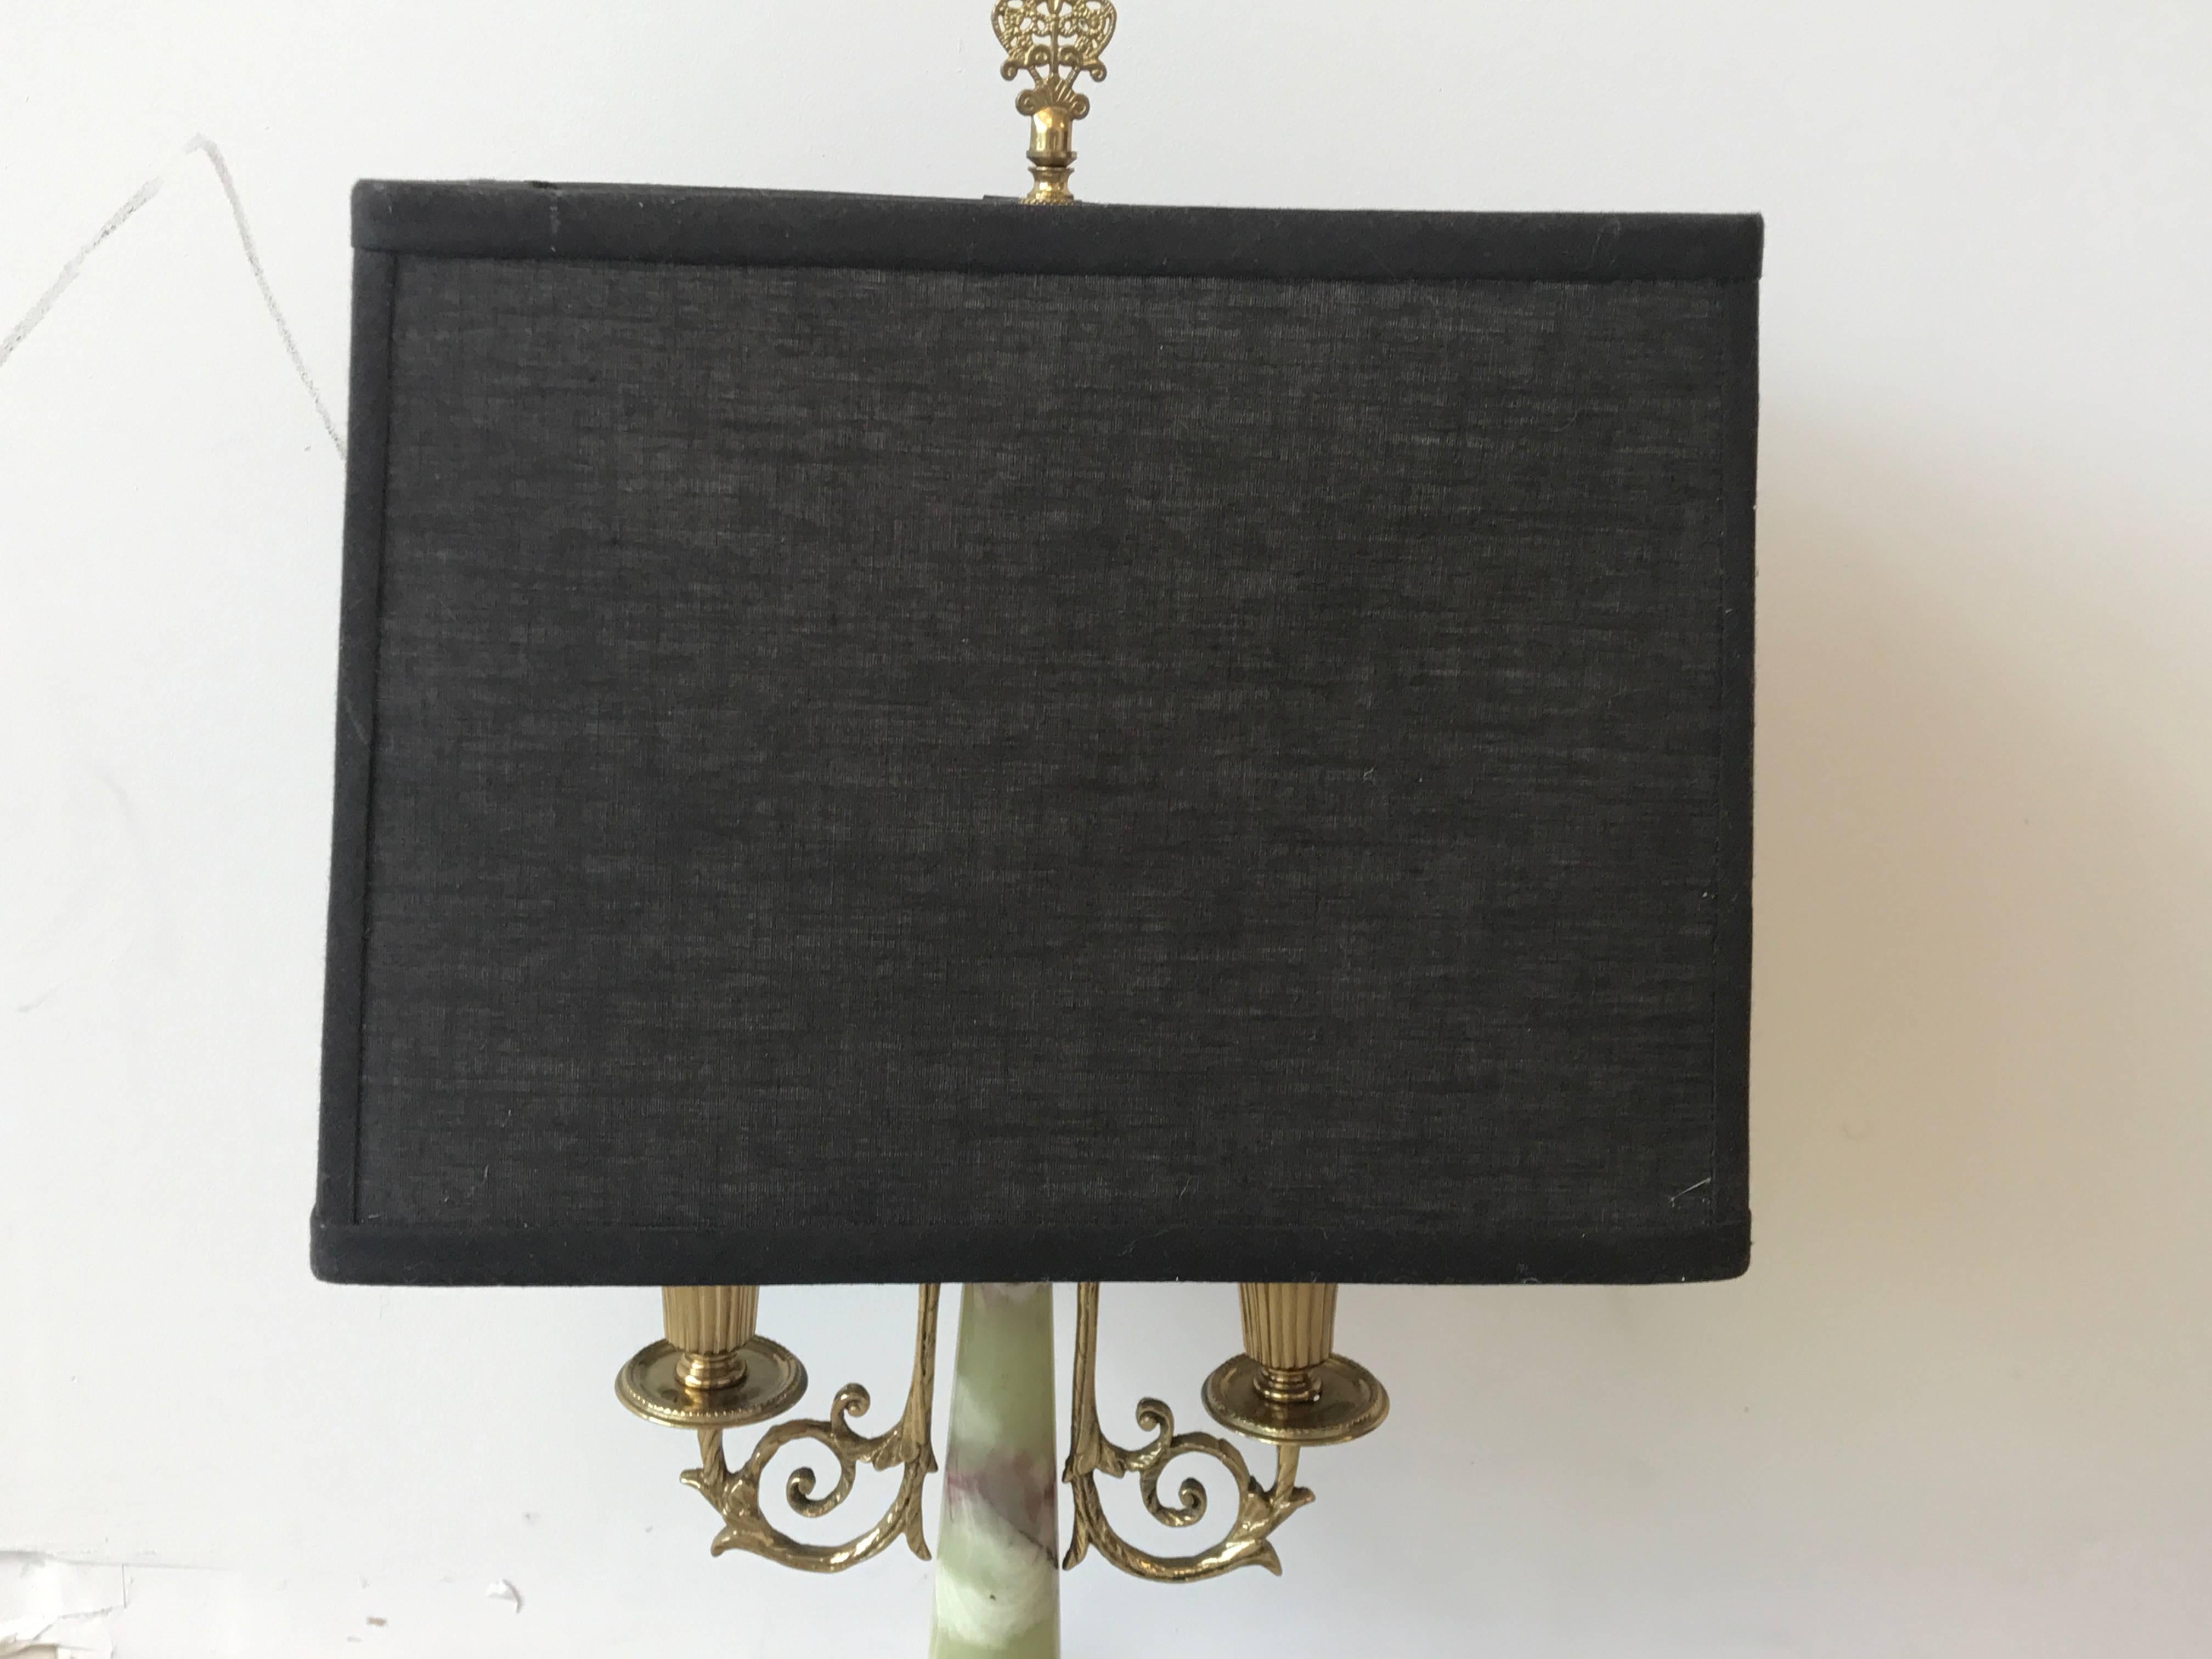 1940s Italian Brass and Onyx Bouillotte Candlestick Lamp with Shade In Excellent Condition For Sale In Richmond, VA